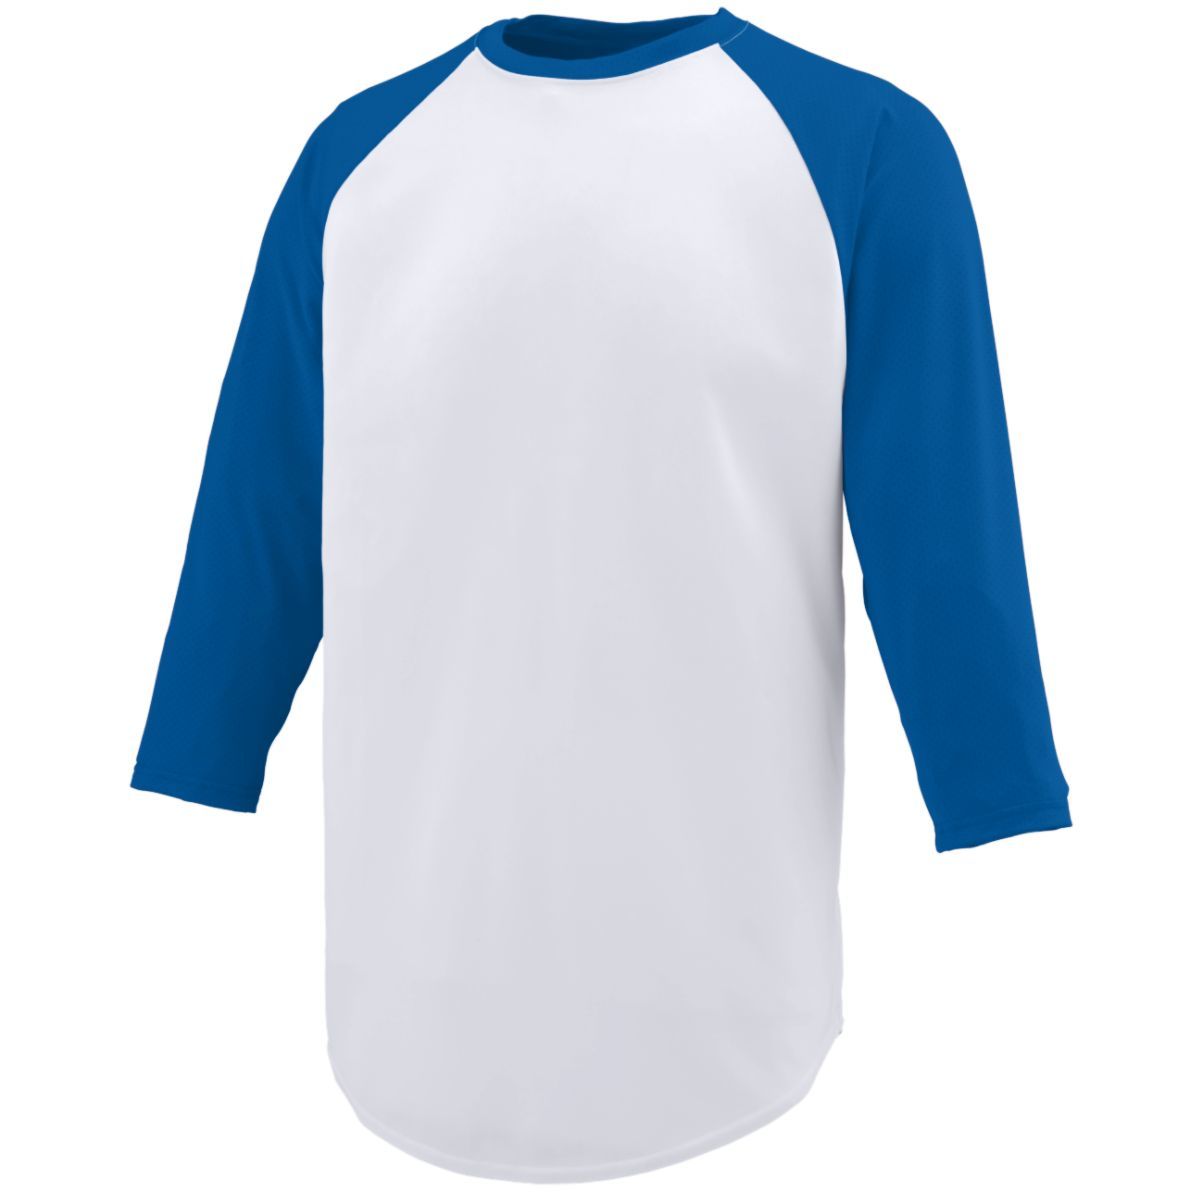 Augusta Sportswear Youth Nova Jersey in White/Royal  -Part of the Youth, Youth-Jersey, Augusta-Products, Baseball, Shirts, All-Sports, All-Sports-1 product lines at KanaleyCreations.com